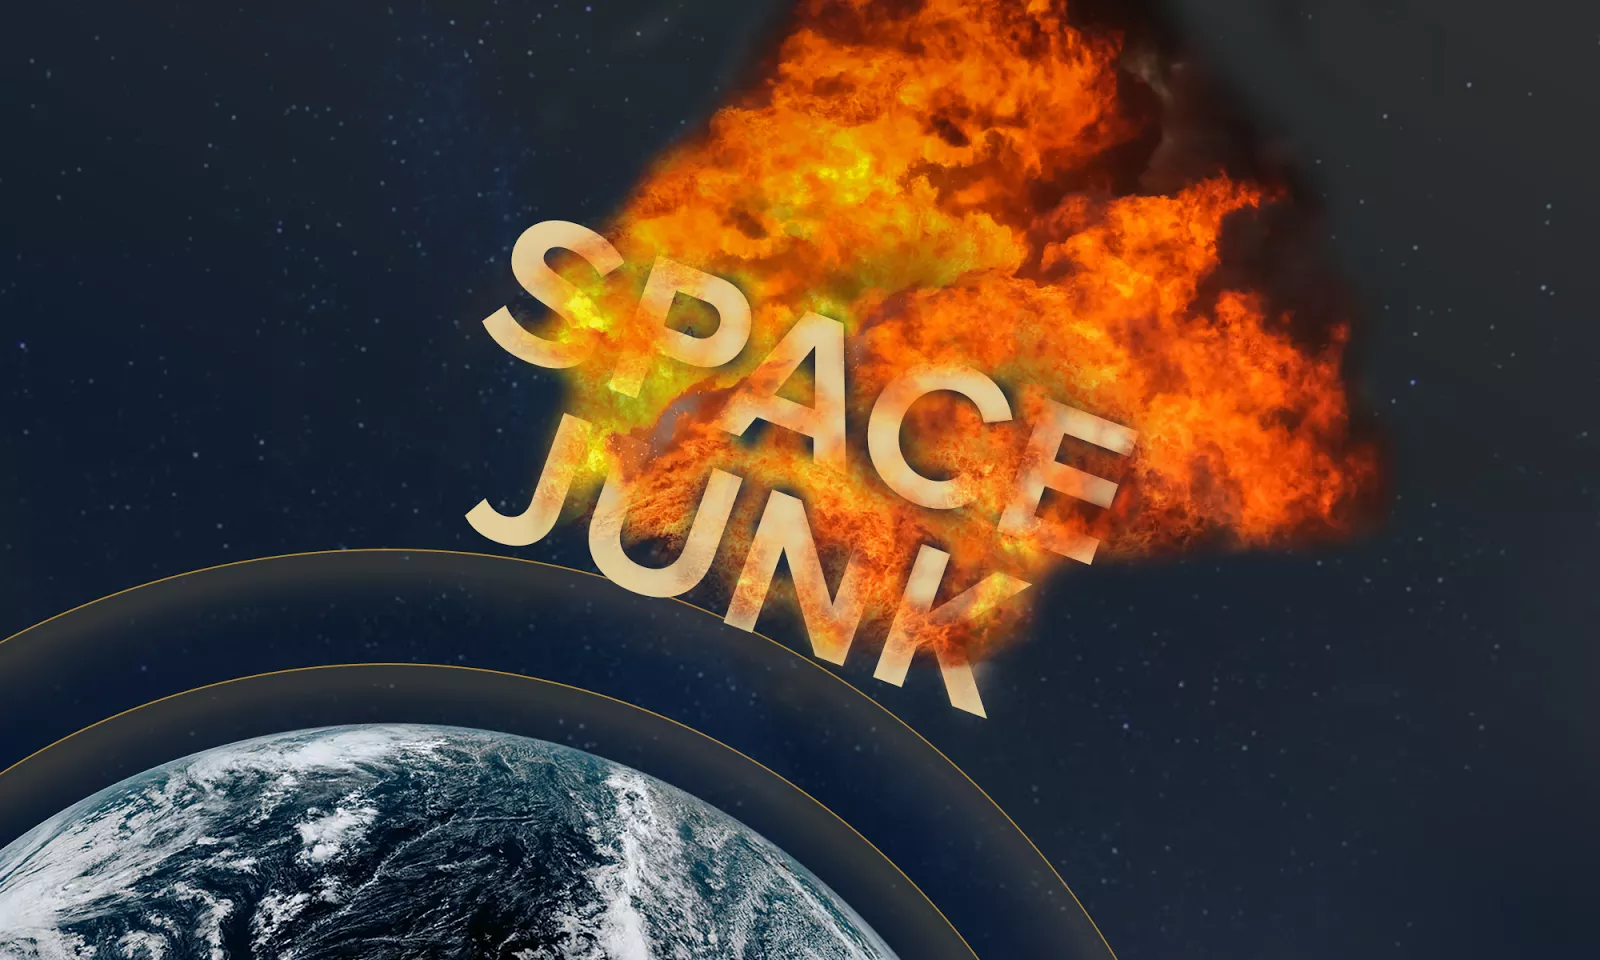 Graphic image of space junk